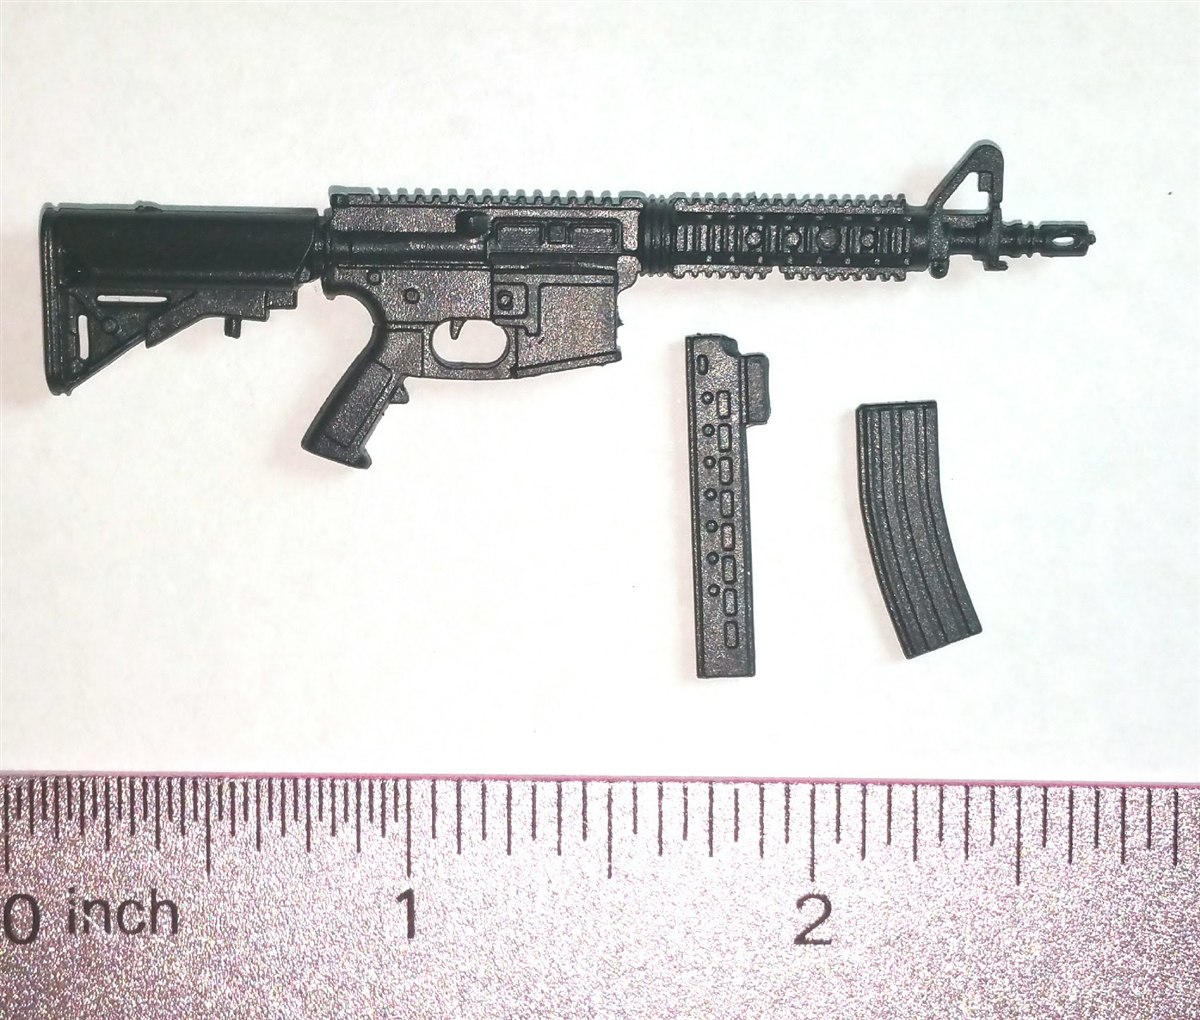 Gun Runners Weapons M4-CQB Assault Rifle w//Accessory Set 1//12 scale toy.